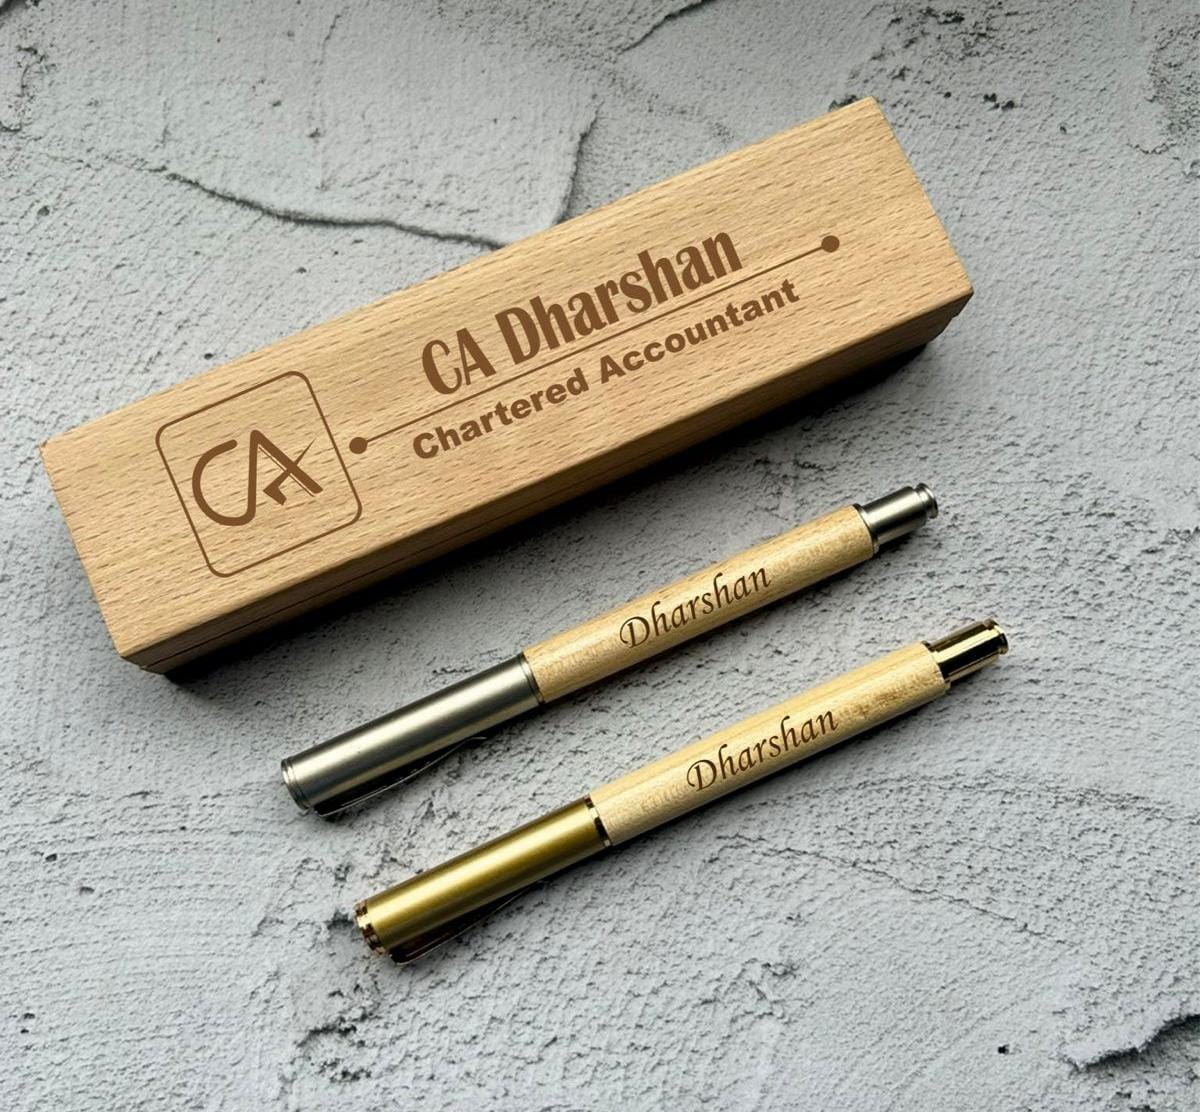 Gift For CA – Personalized CA Pen with Keychain – Gift for Chartered  Accountants, Key Chains, Designer Key Chain, Angry Birds Keychain, चाबी का  छल्ला, कीचेन - Zest Pics, Hyderabad | ID: 2853221349397